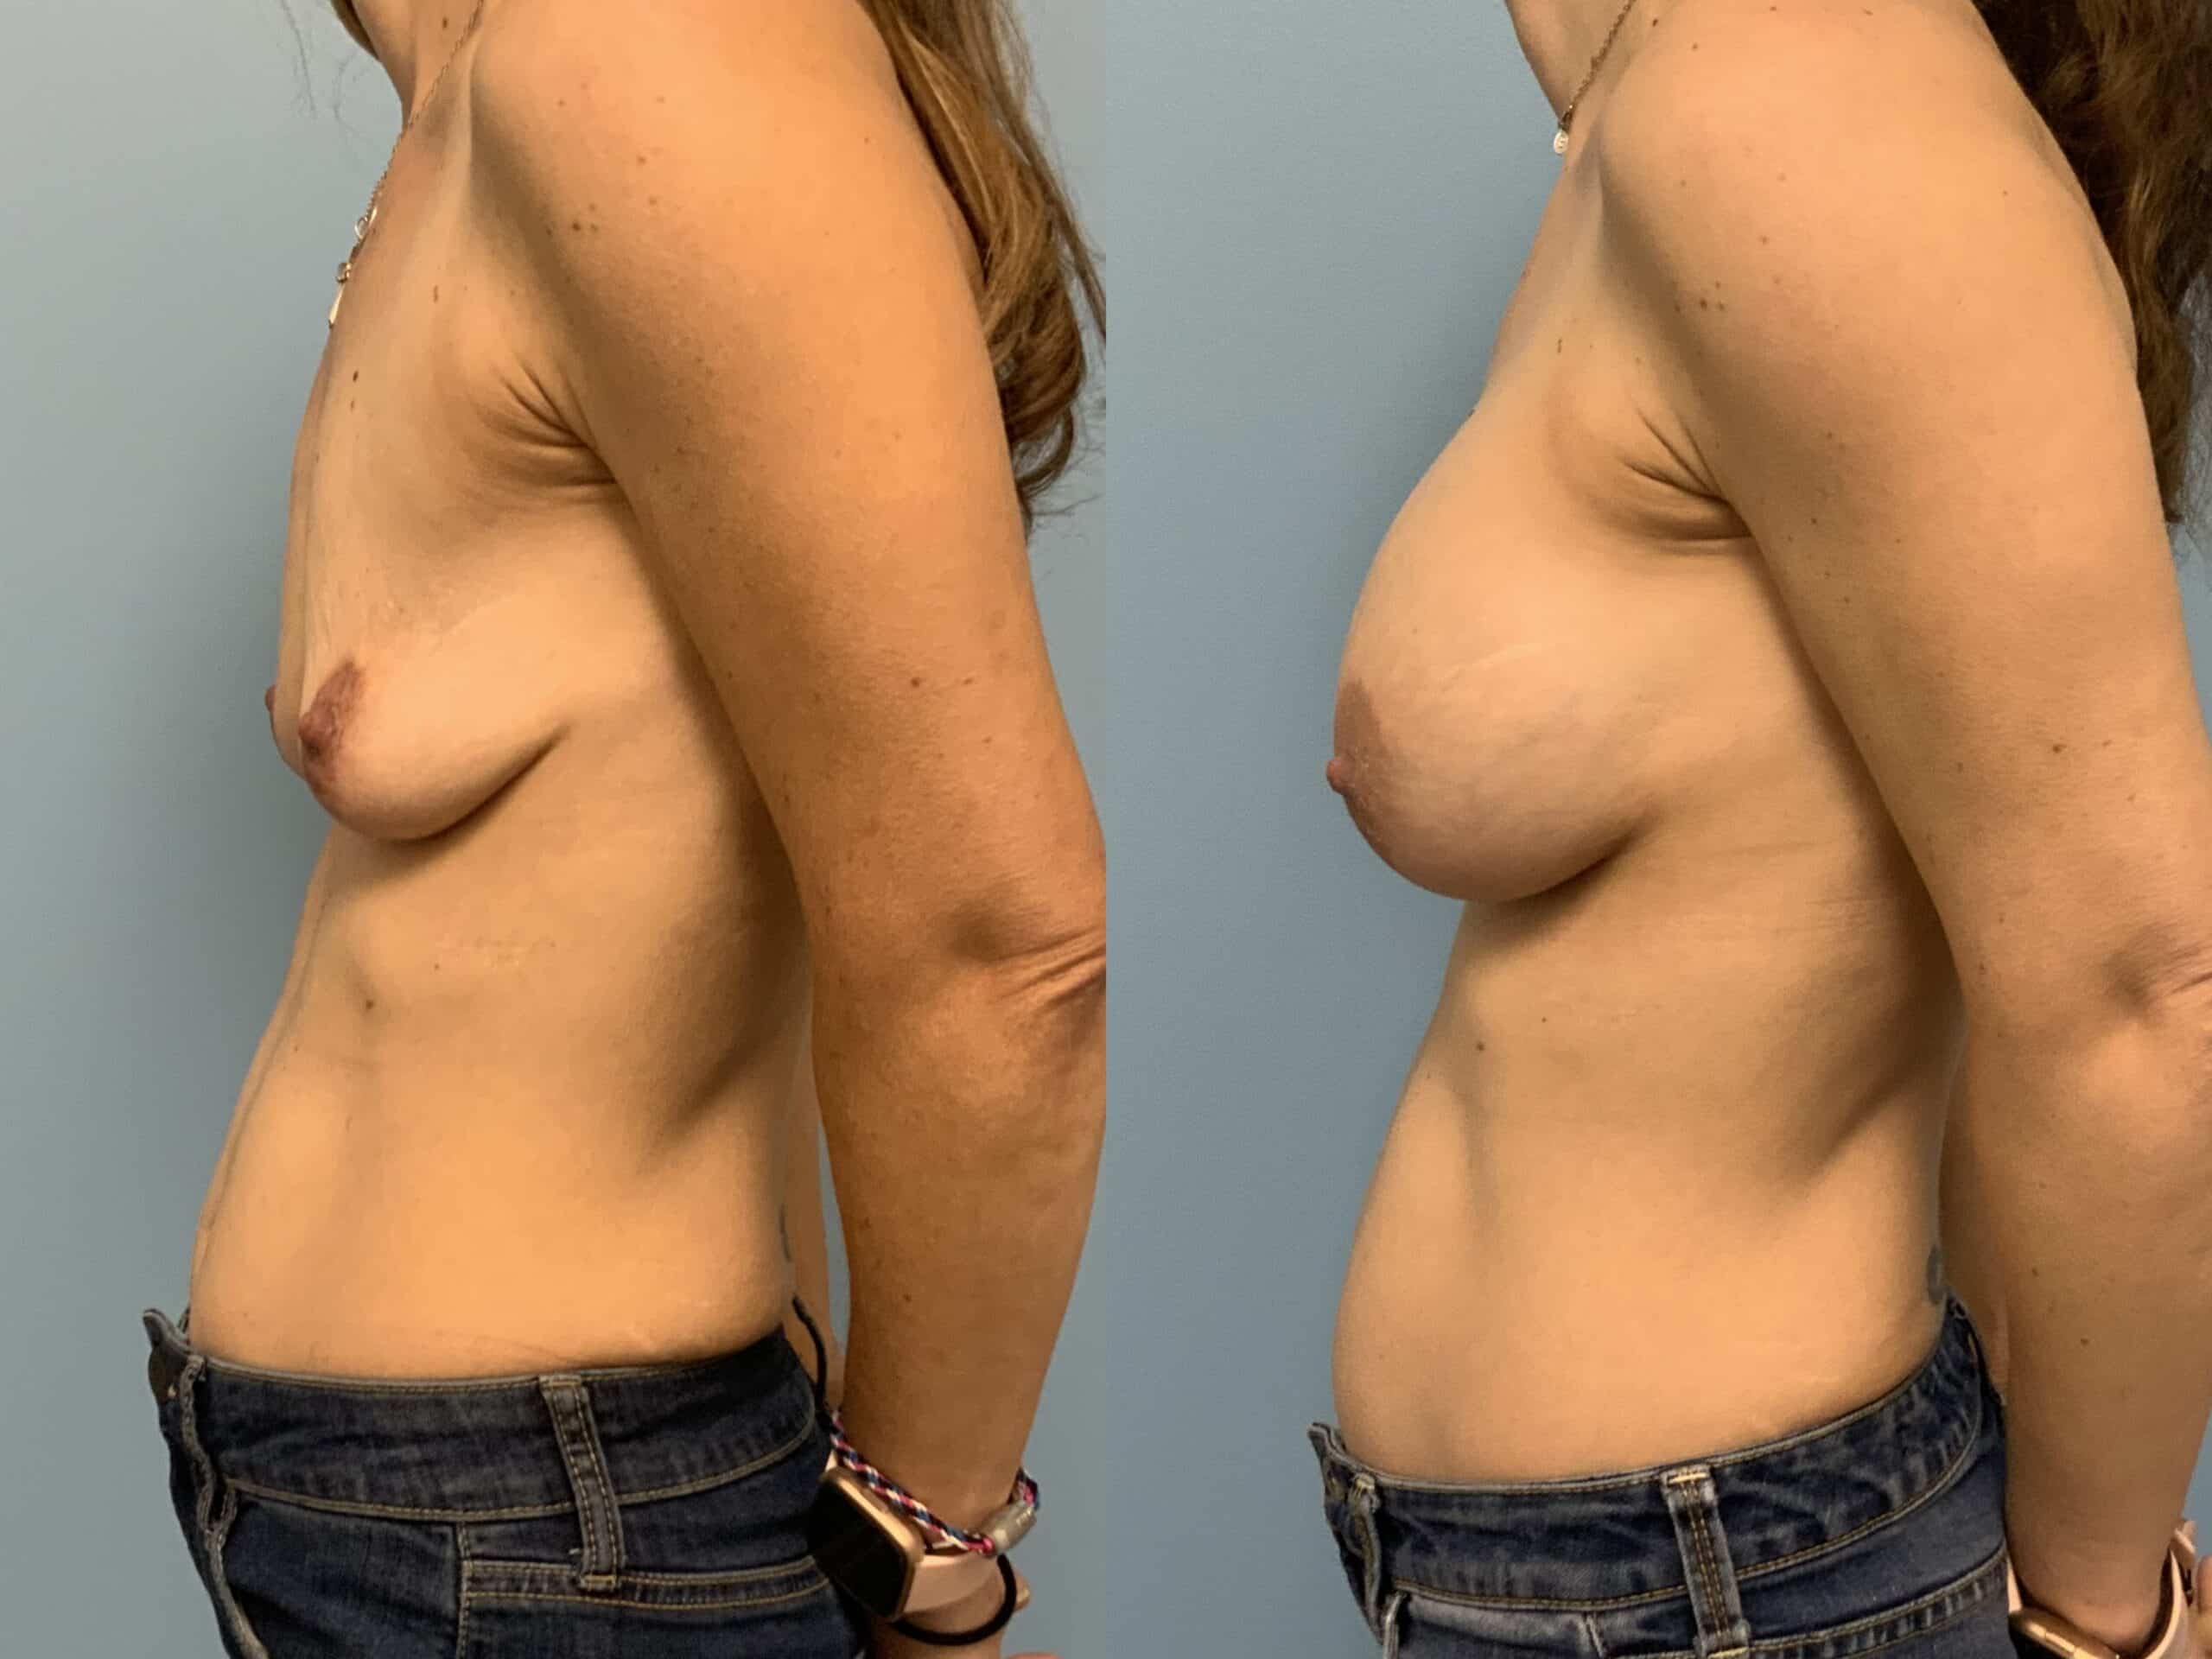 Before and after, patient 5 mo post op from Breast augmentation and level III muscle release procedures performed by Dr. Paul Vanek